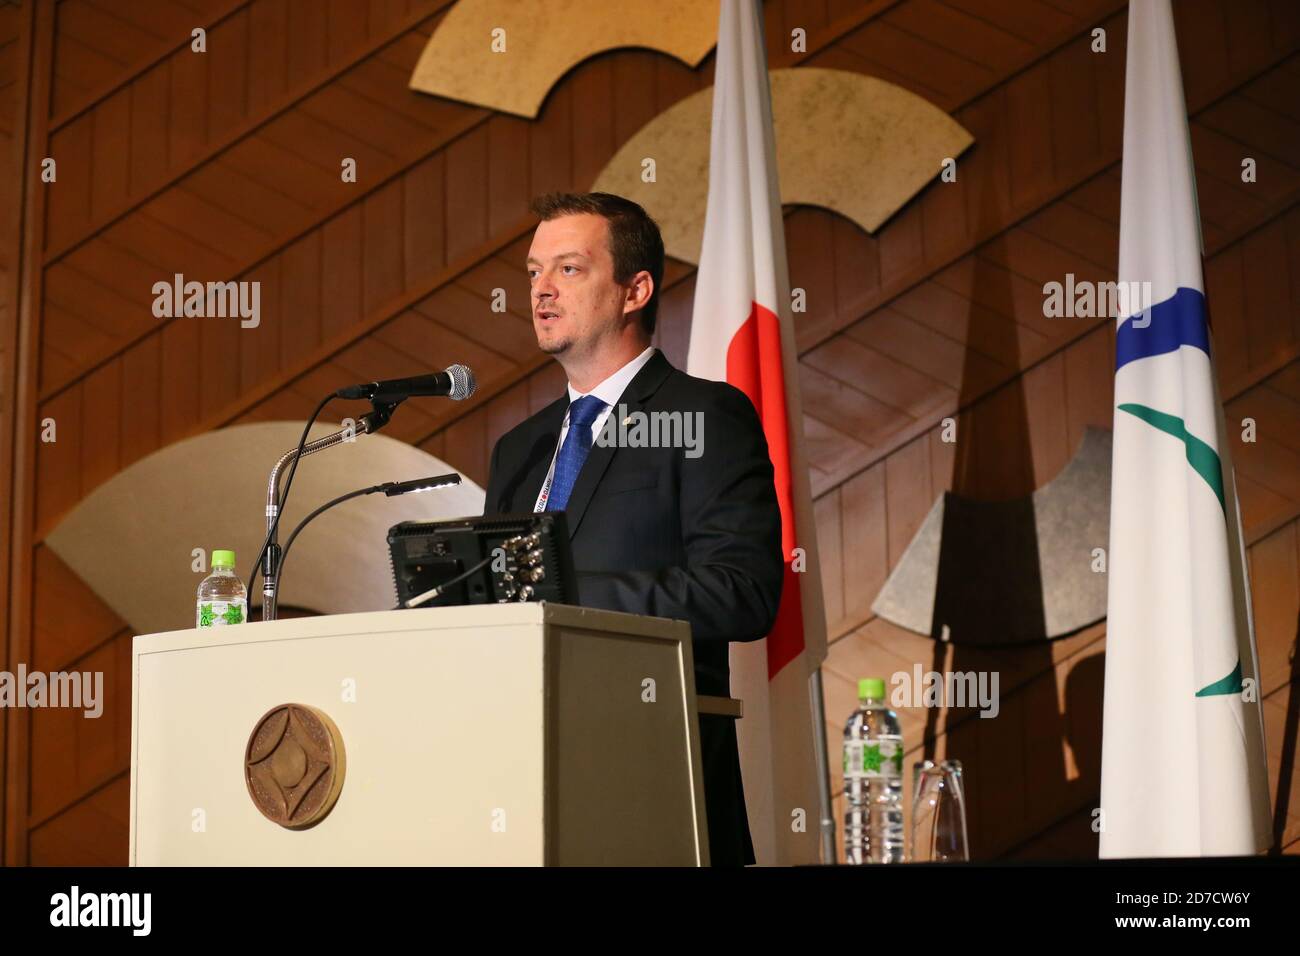 Andrew Parsons, vice president of International Paralympic Committee (IPC) attends the IPC/Tokyo 2020 - Orientation Seminar in Tokyo, Japan on January 19, 2014. Credit: AFLO SPORT/Alamy Live News Stock Photo